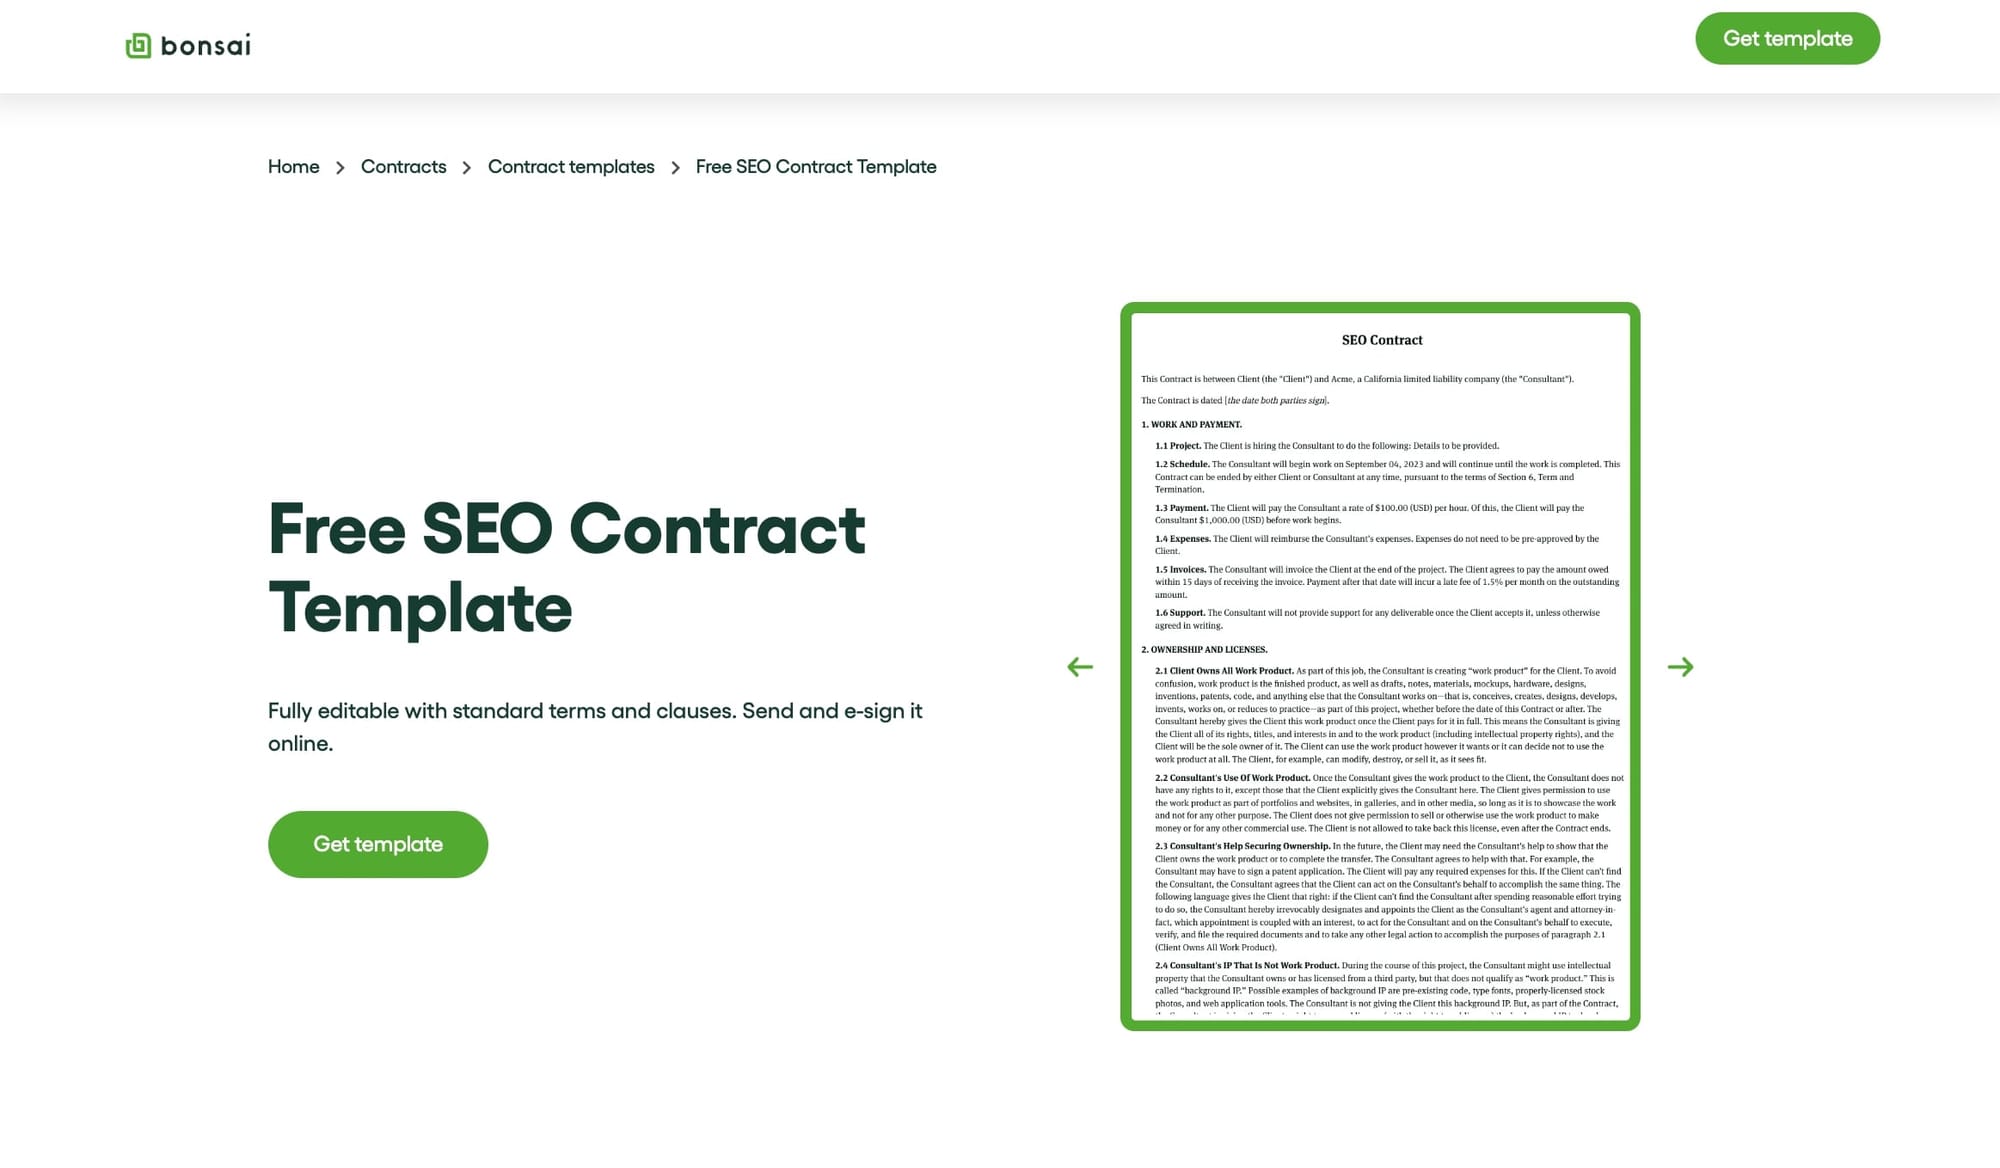 Free SEO contract template from Bonsai